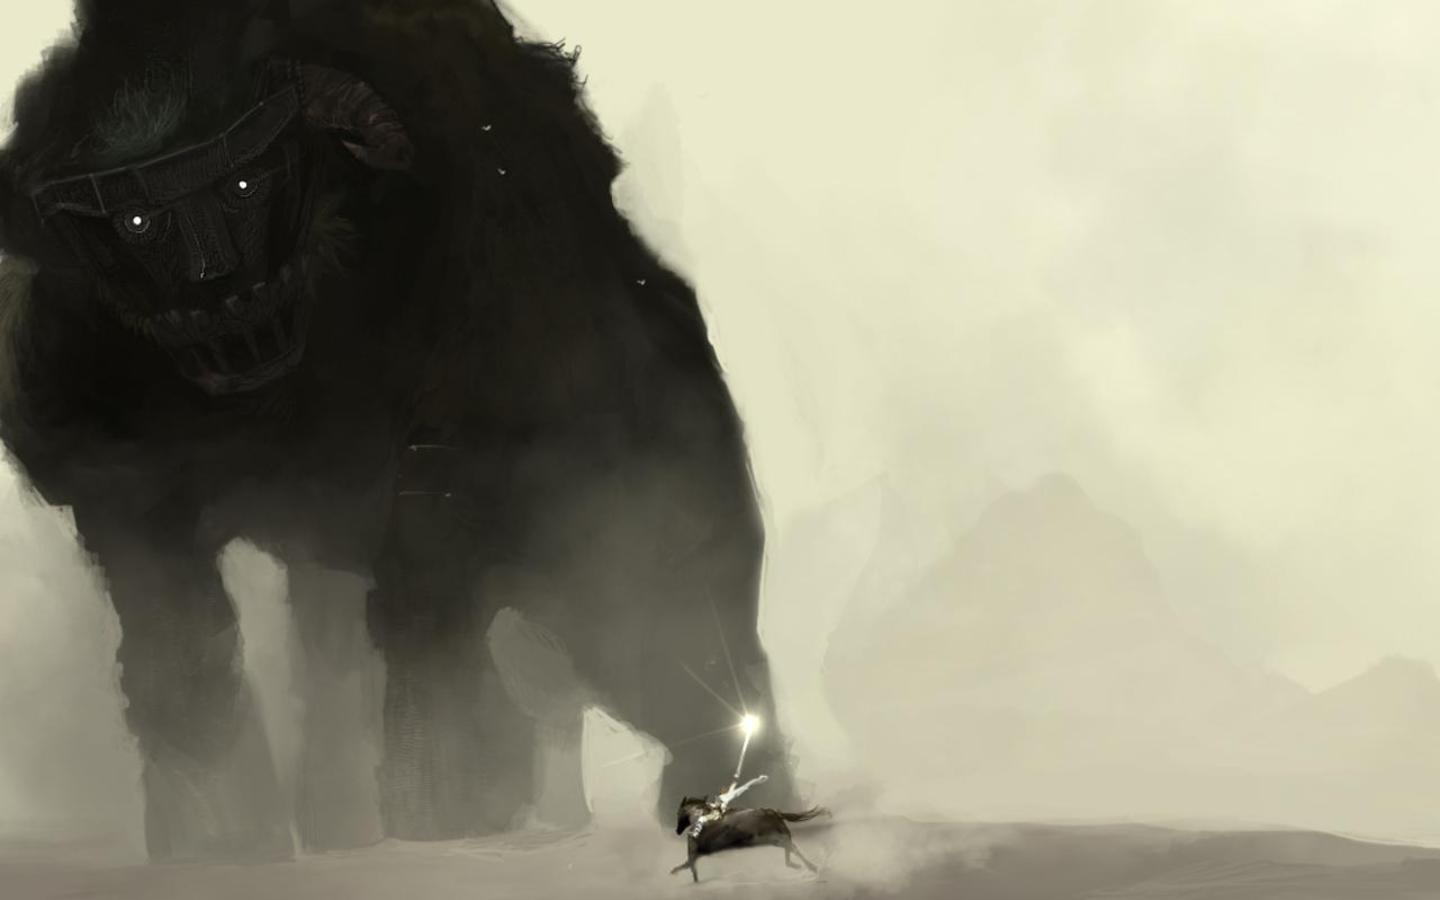 Shadow of the colossus pc background - automotivejord